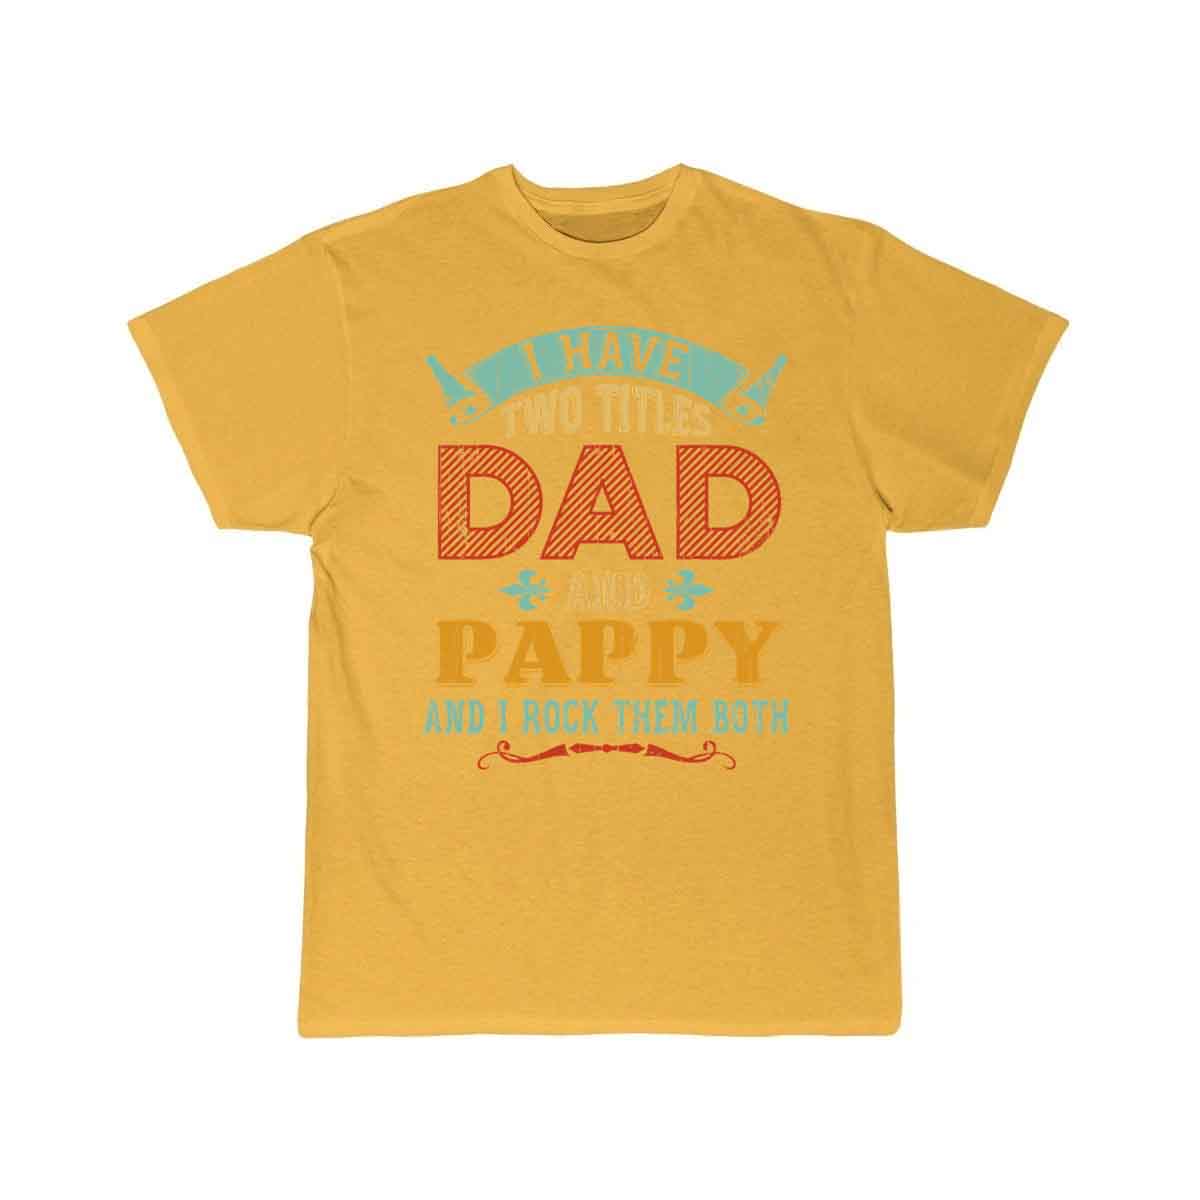 Mens I Have Two Titles Dad And Pappy Funny T-SHIRT THE AV8R